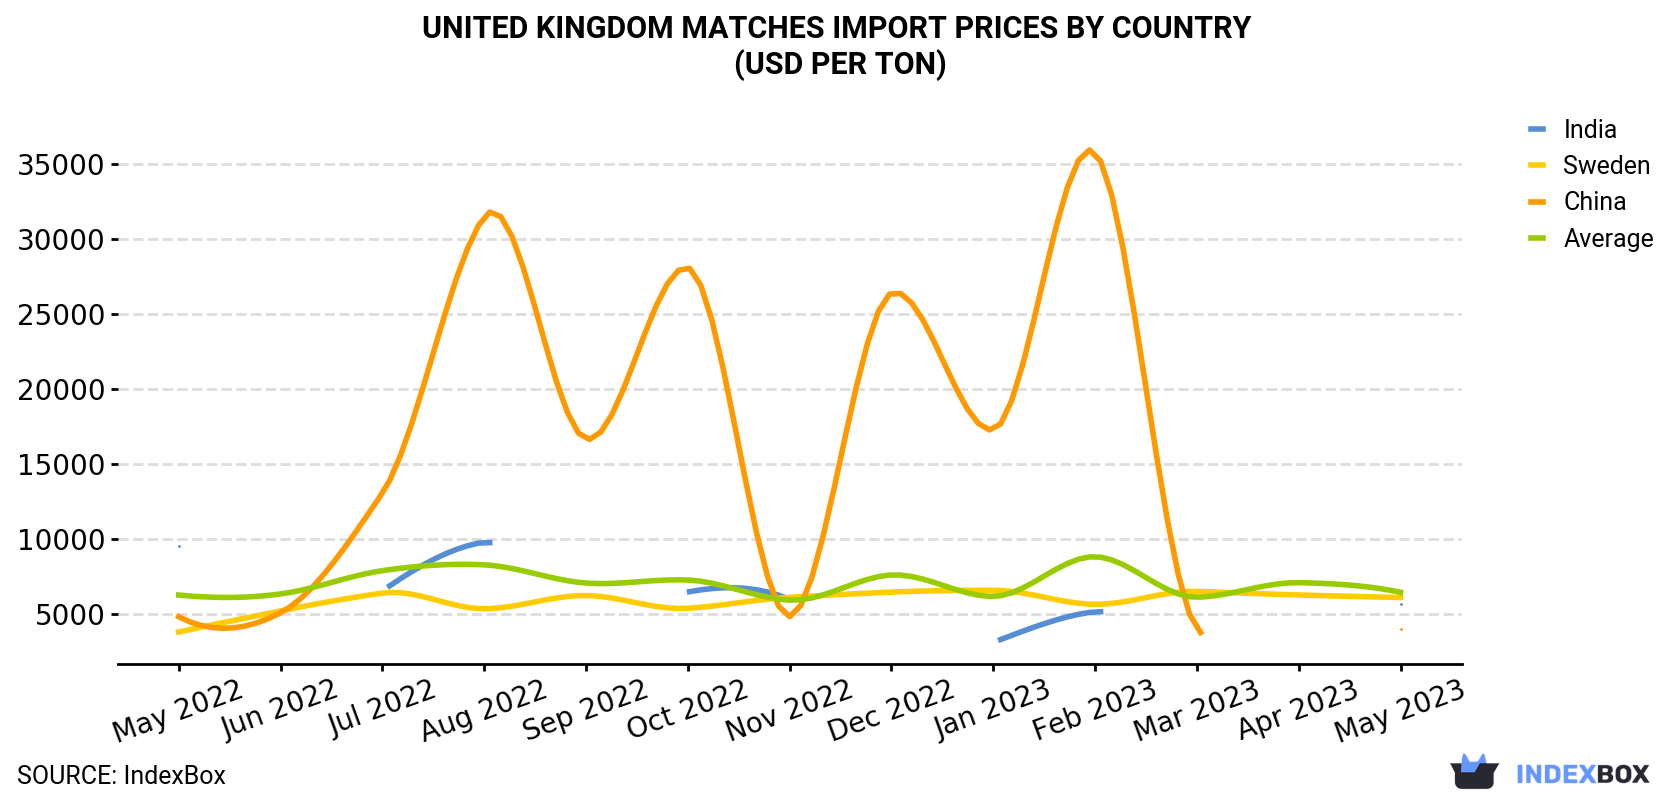 United Kingdom Matches Import Prices By Country (USD Per Ton)